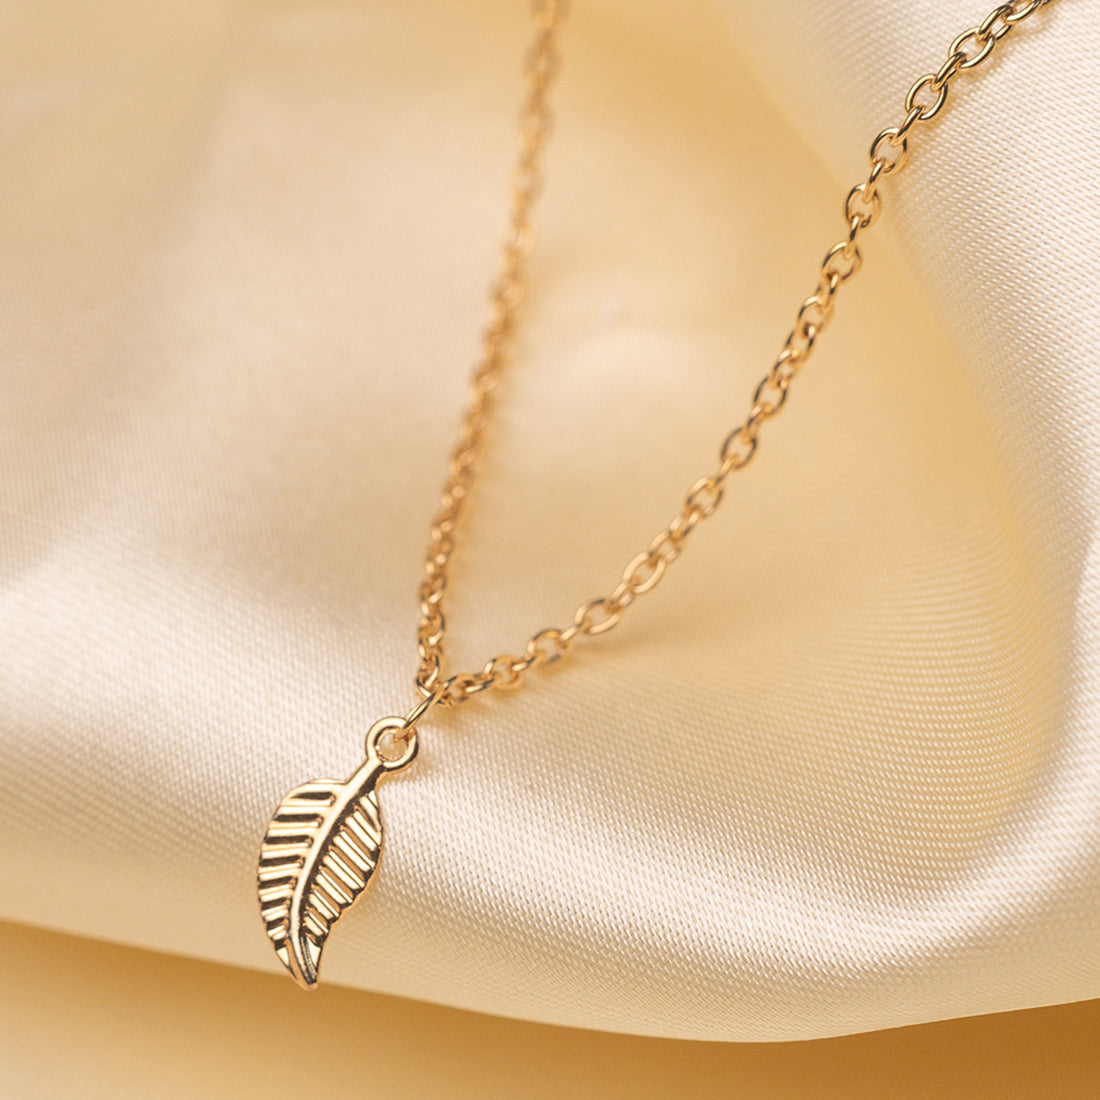 Chic Gold-Toned Leaf Pendant Necklace